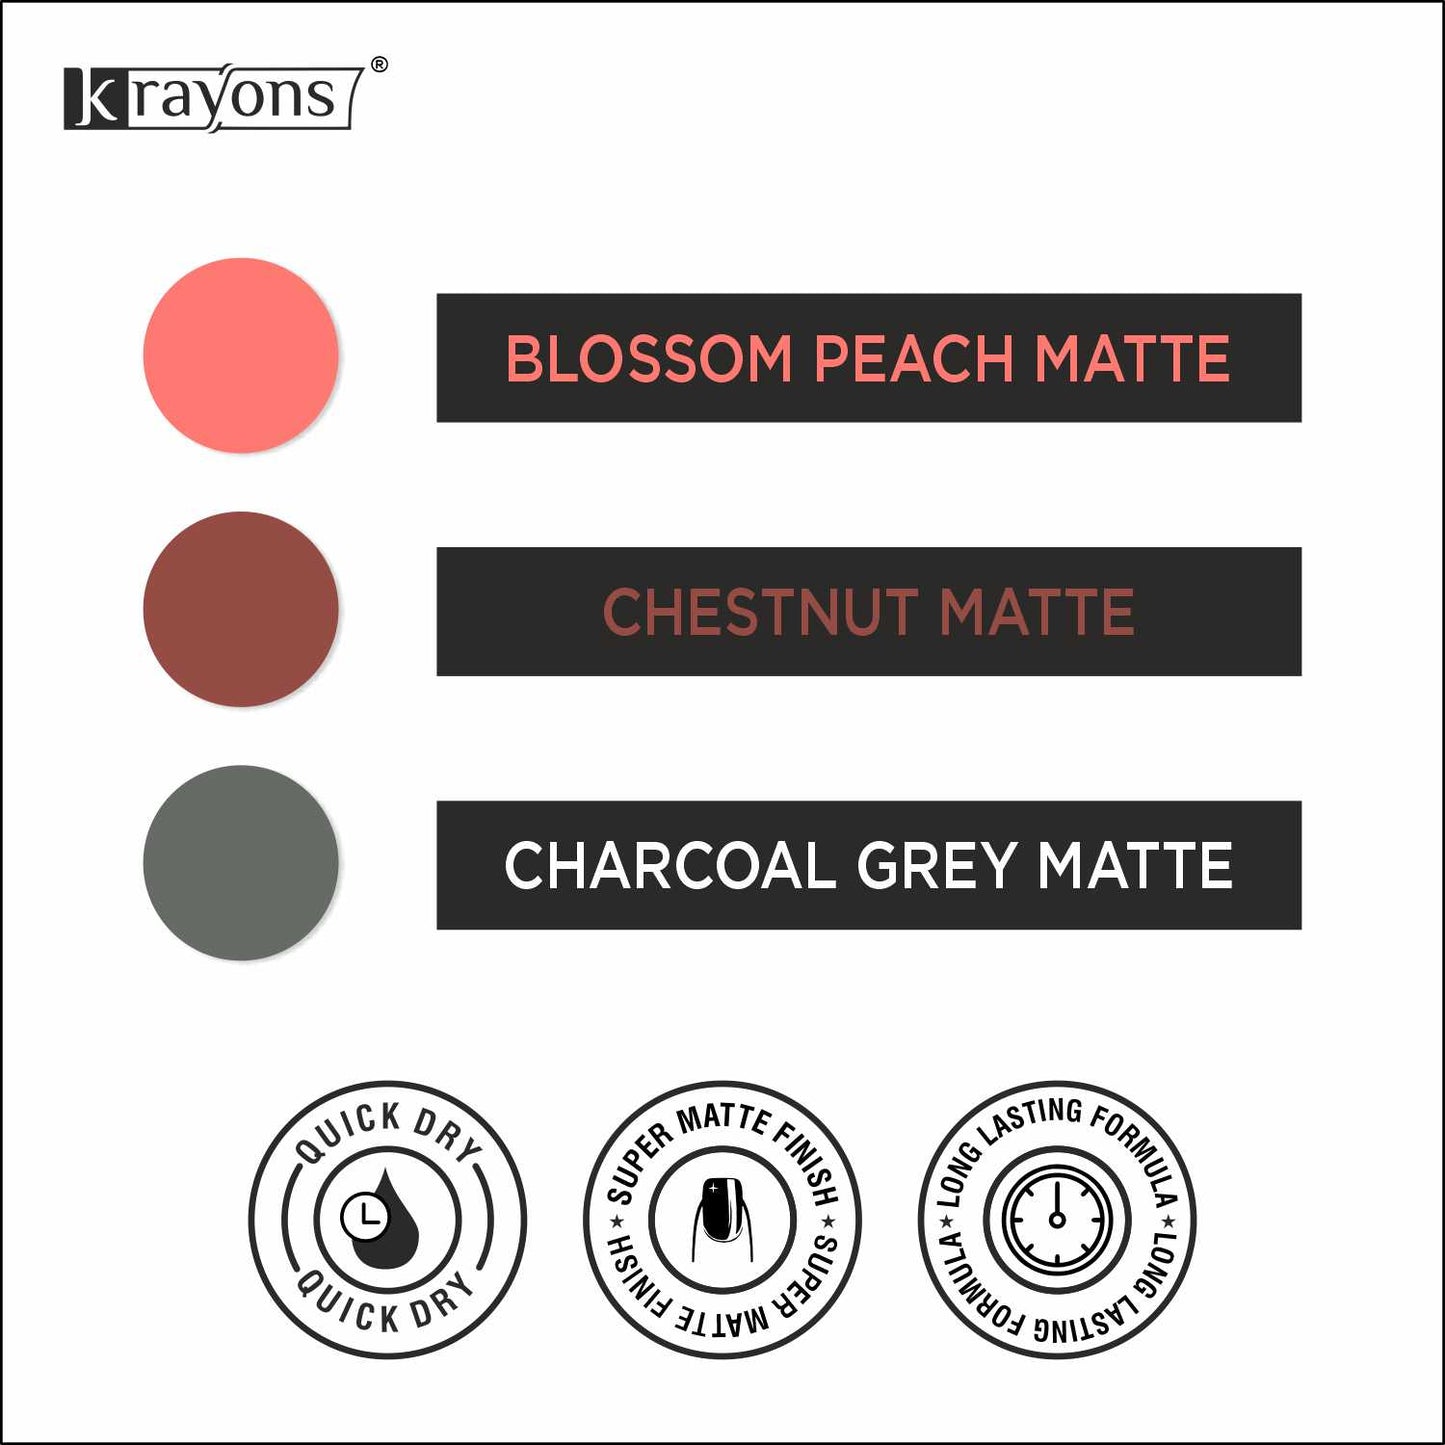 Krayons Cute Super Matte Finish Nail Enamel, Quick Dry, LongLasting, Blossom Peach, Chestnut Matte, Charcoal Grey, 6ml Each (Pack of 3)